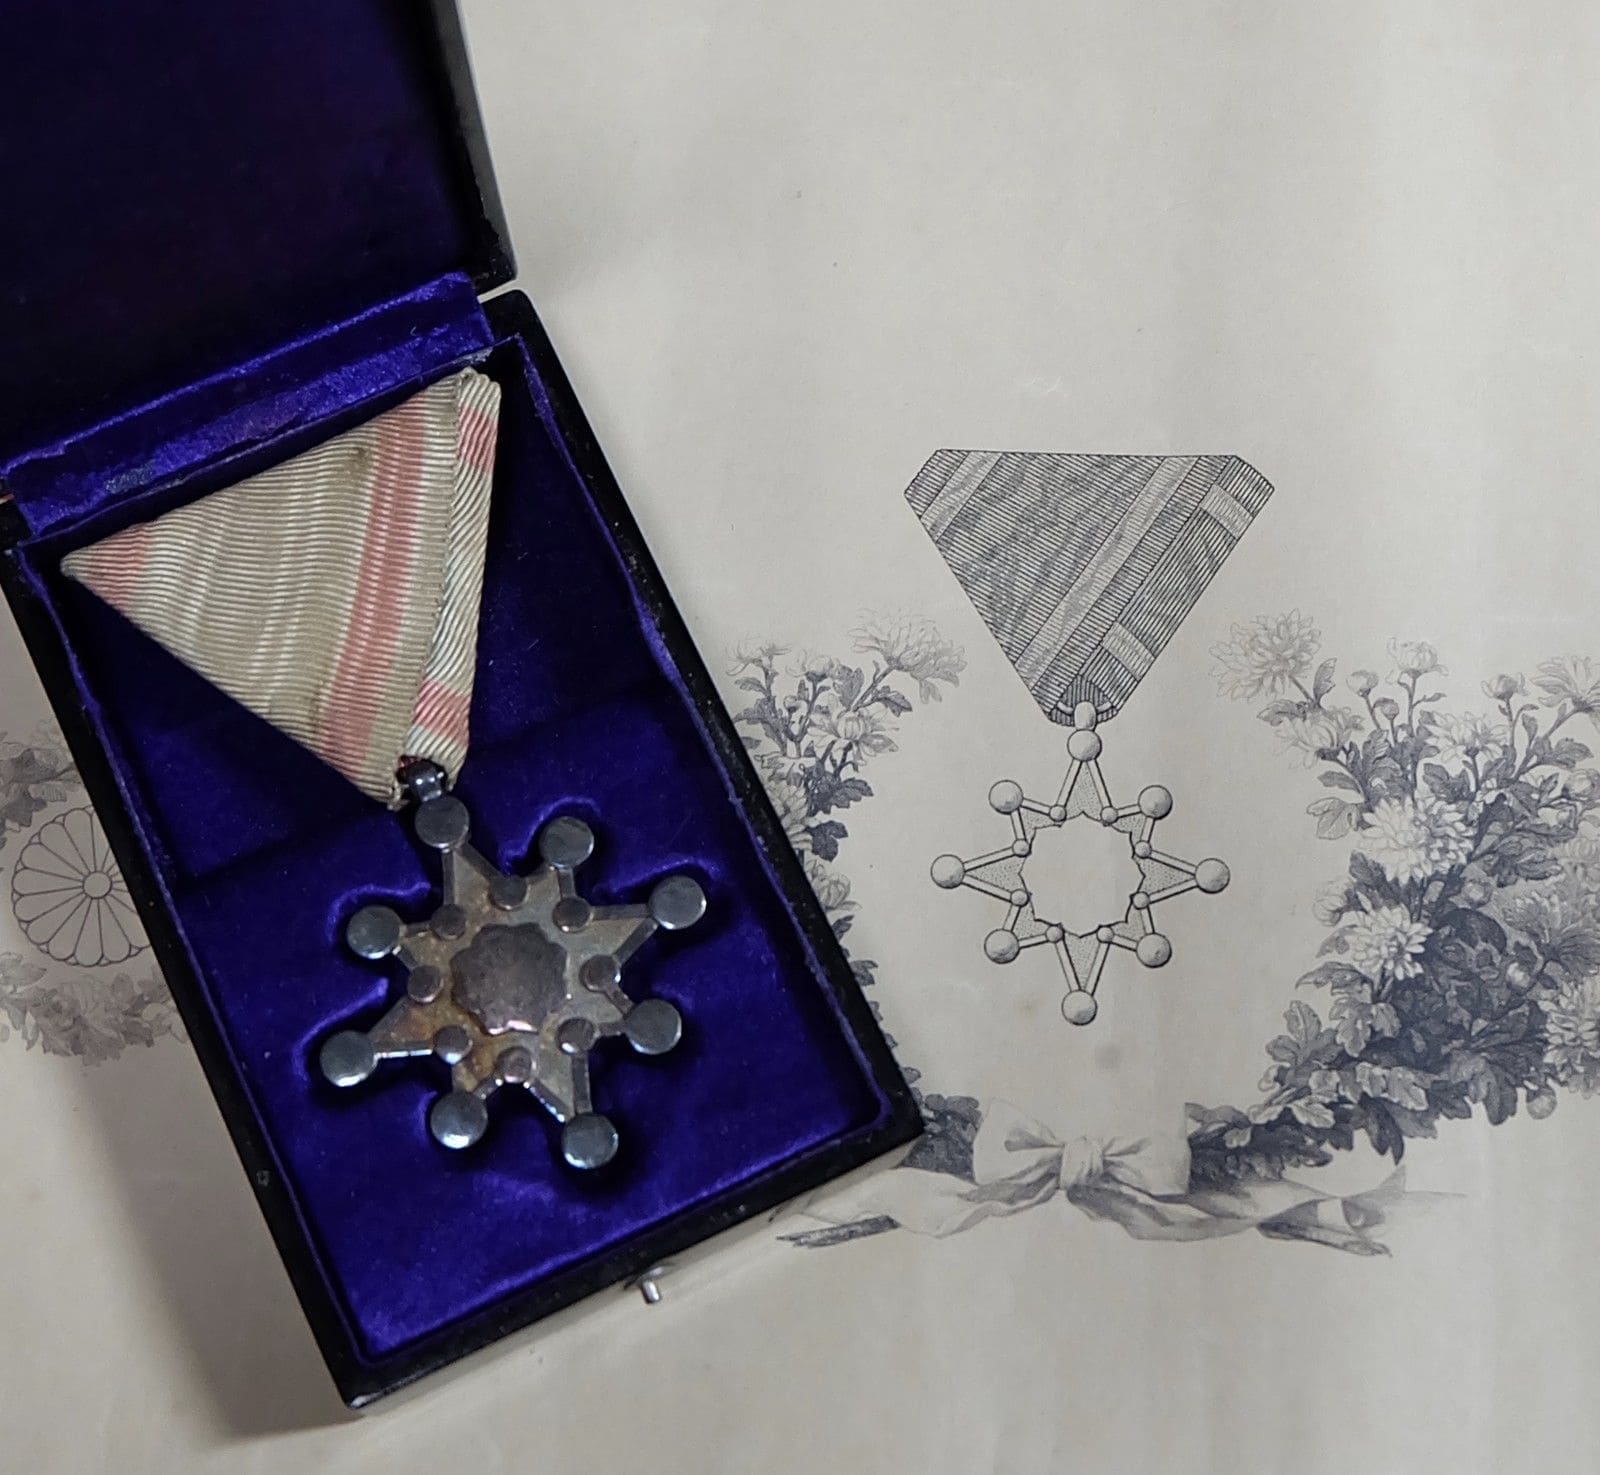 8th  class Sacred Treasure order with Pink ribbon awarded in 1917.jpg